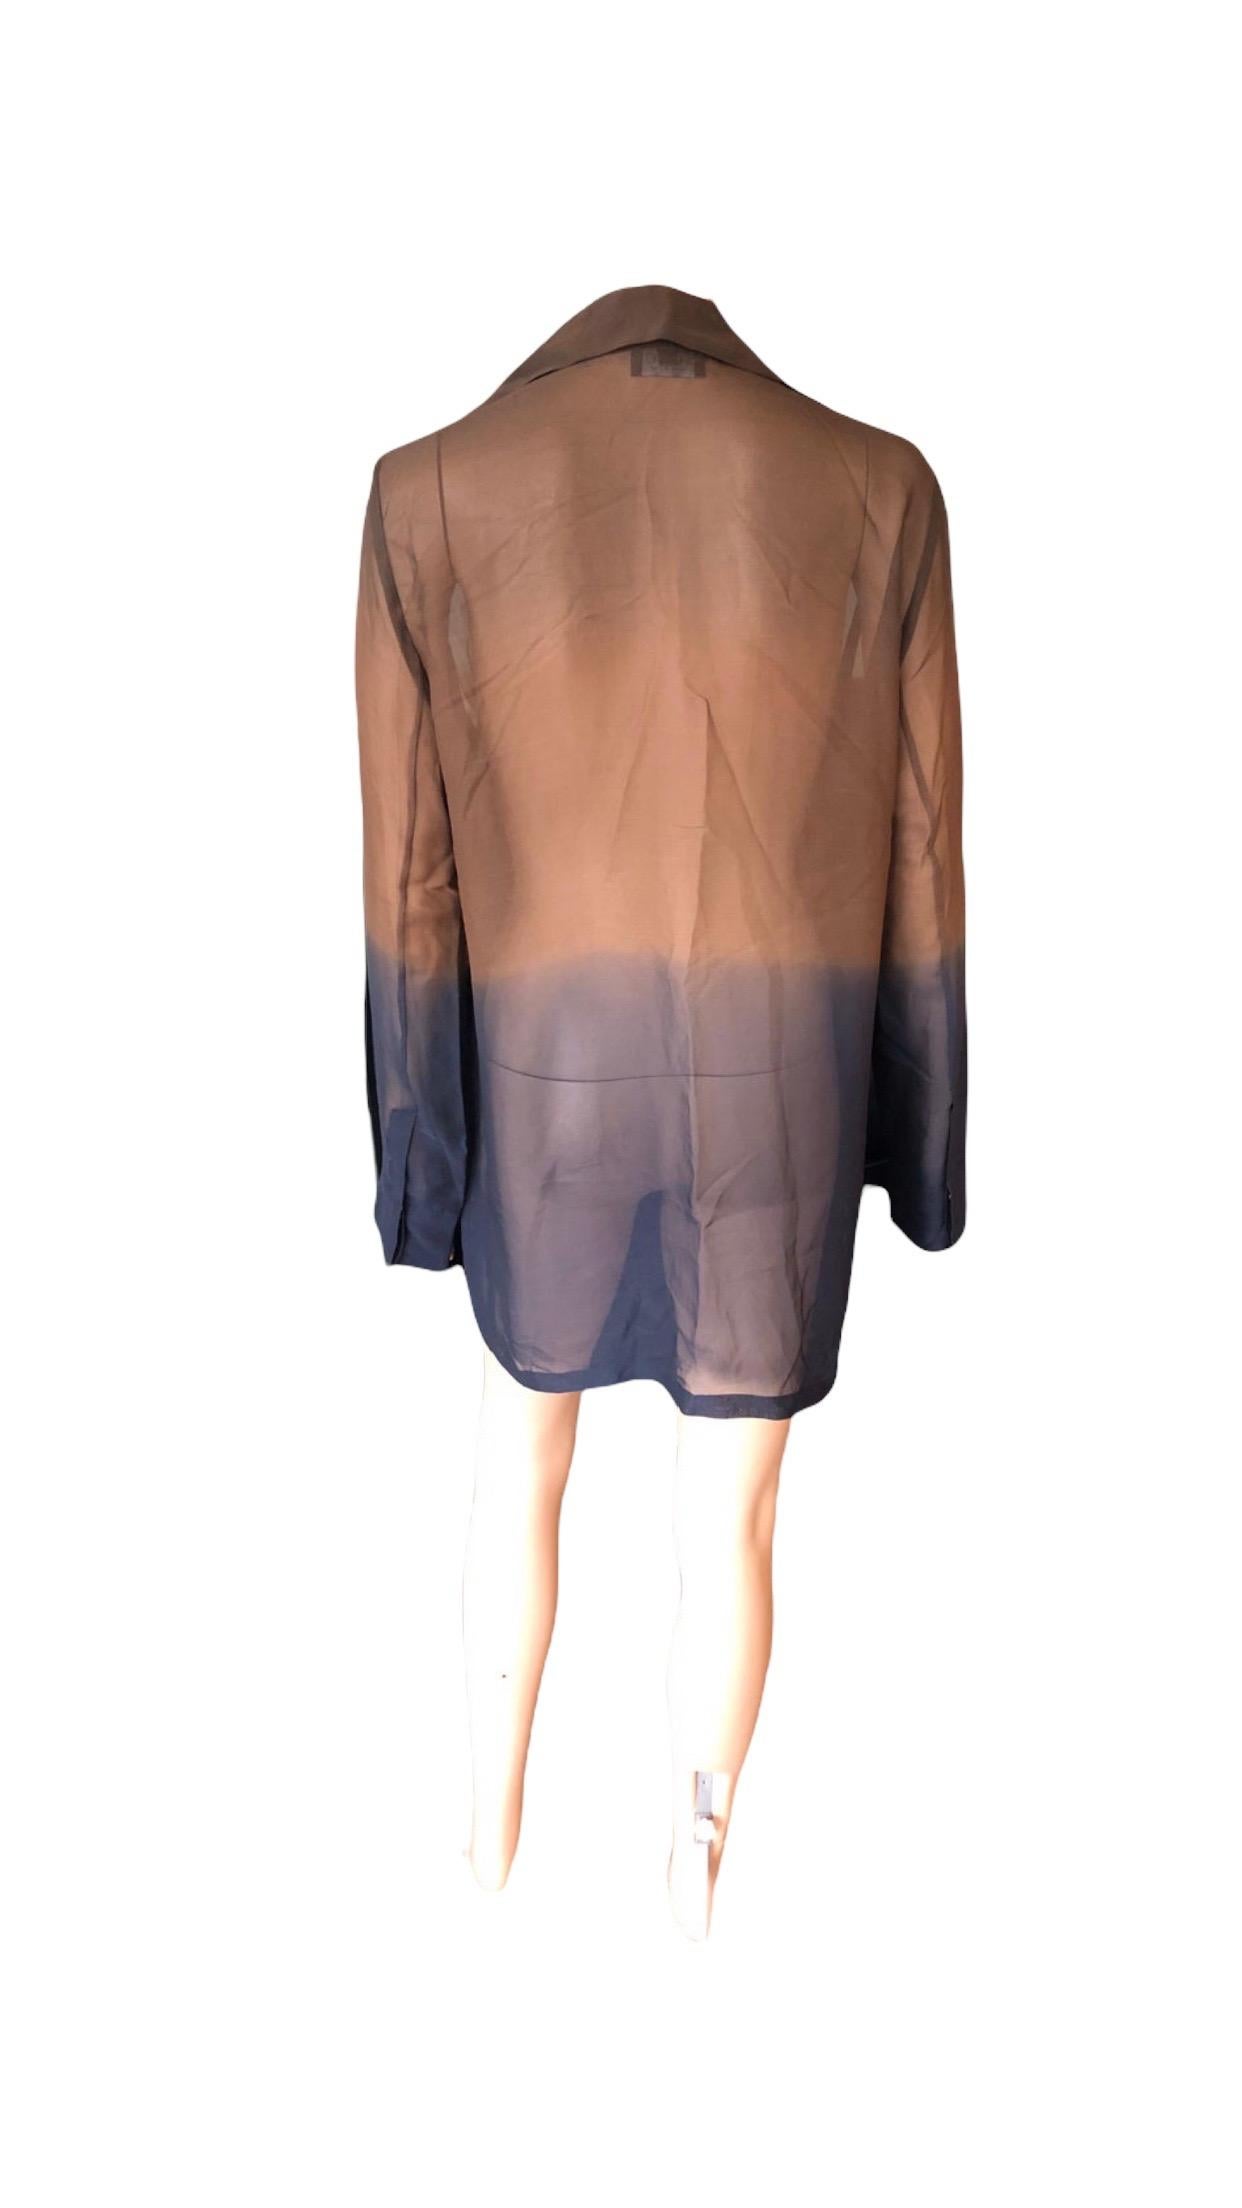 Gucci by Tom Ford 1997 Vintage Sheer Brown & Blue Ombre Silk Tunic Top For Sale 8